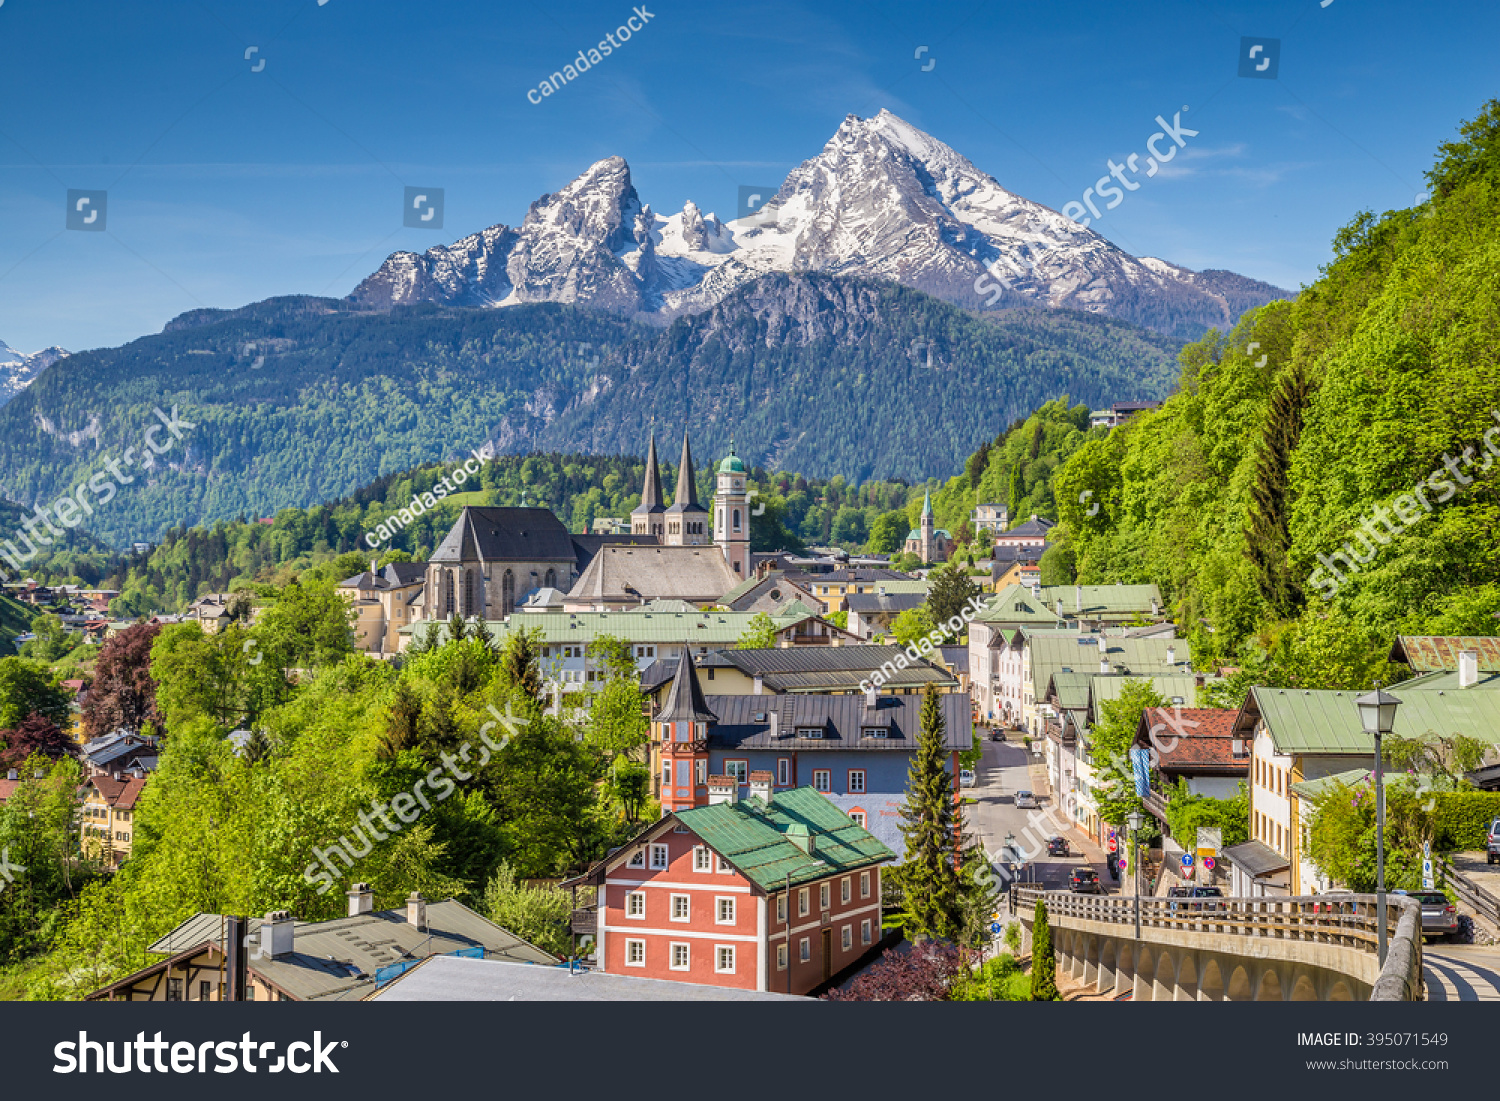 Historic town of Berchtesgaden with famous Watzmann mountain in the background on a sunny day with blue sky and clouds in springtime, Nationalpark Berchtesgadener Land, Upper Bavaria, Germany #395071549